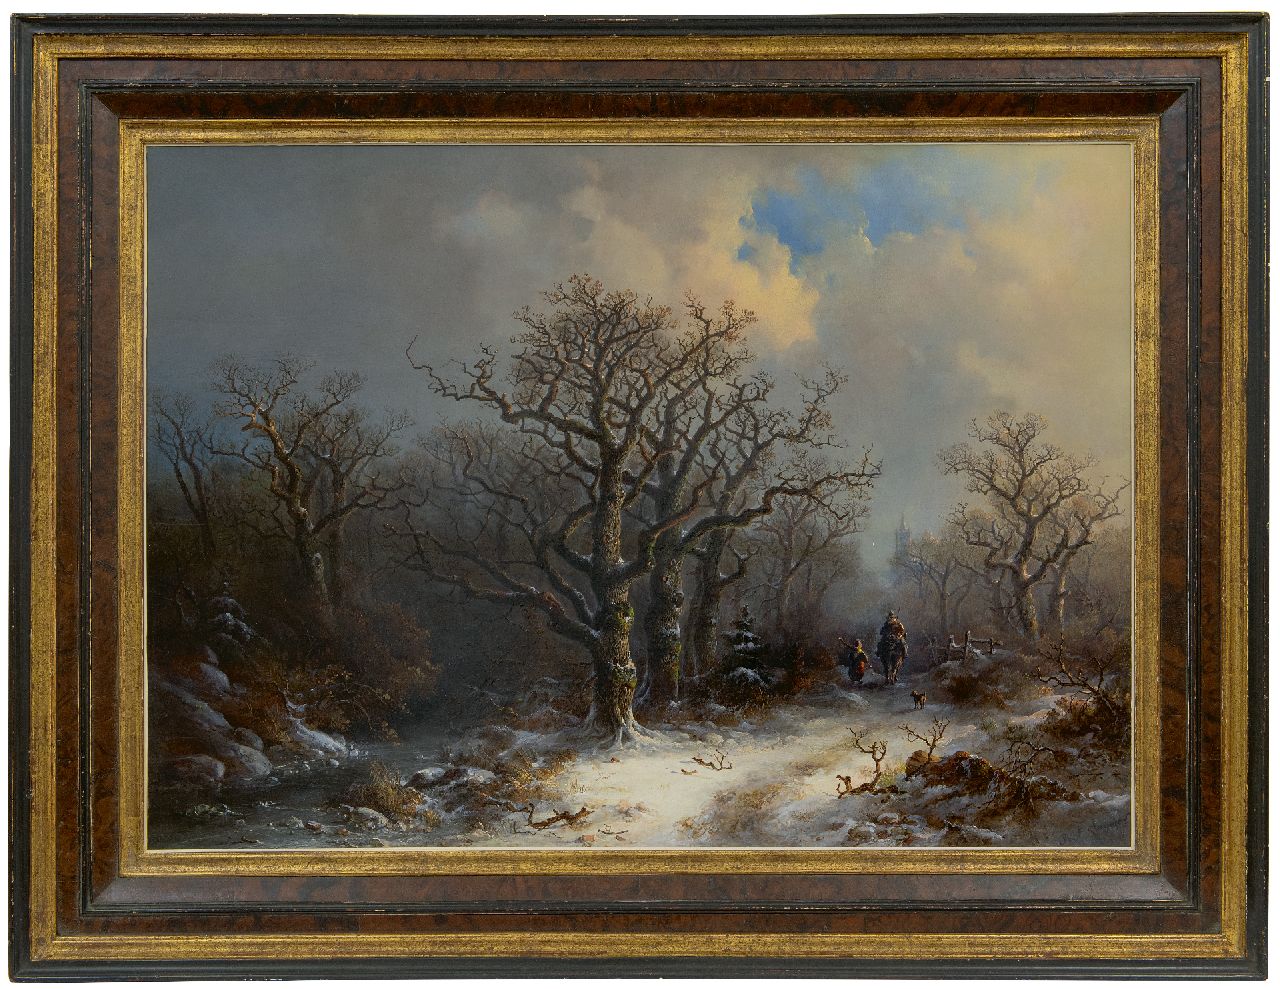 Kluyver P.L.F.  | 'Pieter' Lodewijk Francisco Kluyver | Paintings offered for sale | Country folk on a snowy forest path, oil on panel 61.2 x 84.4 cm, signed l.r.